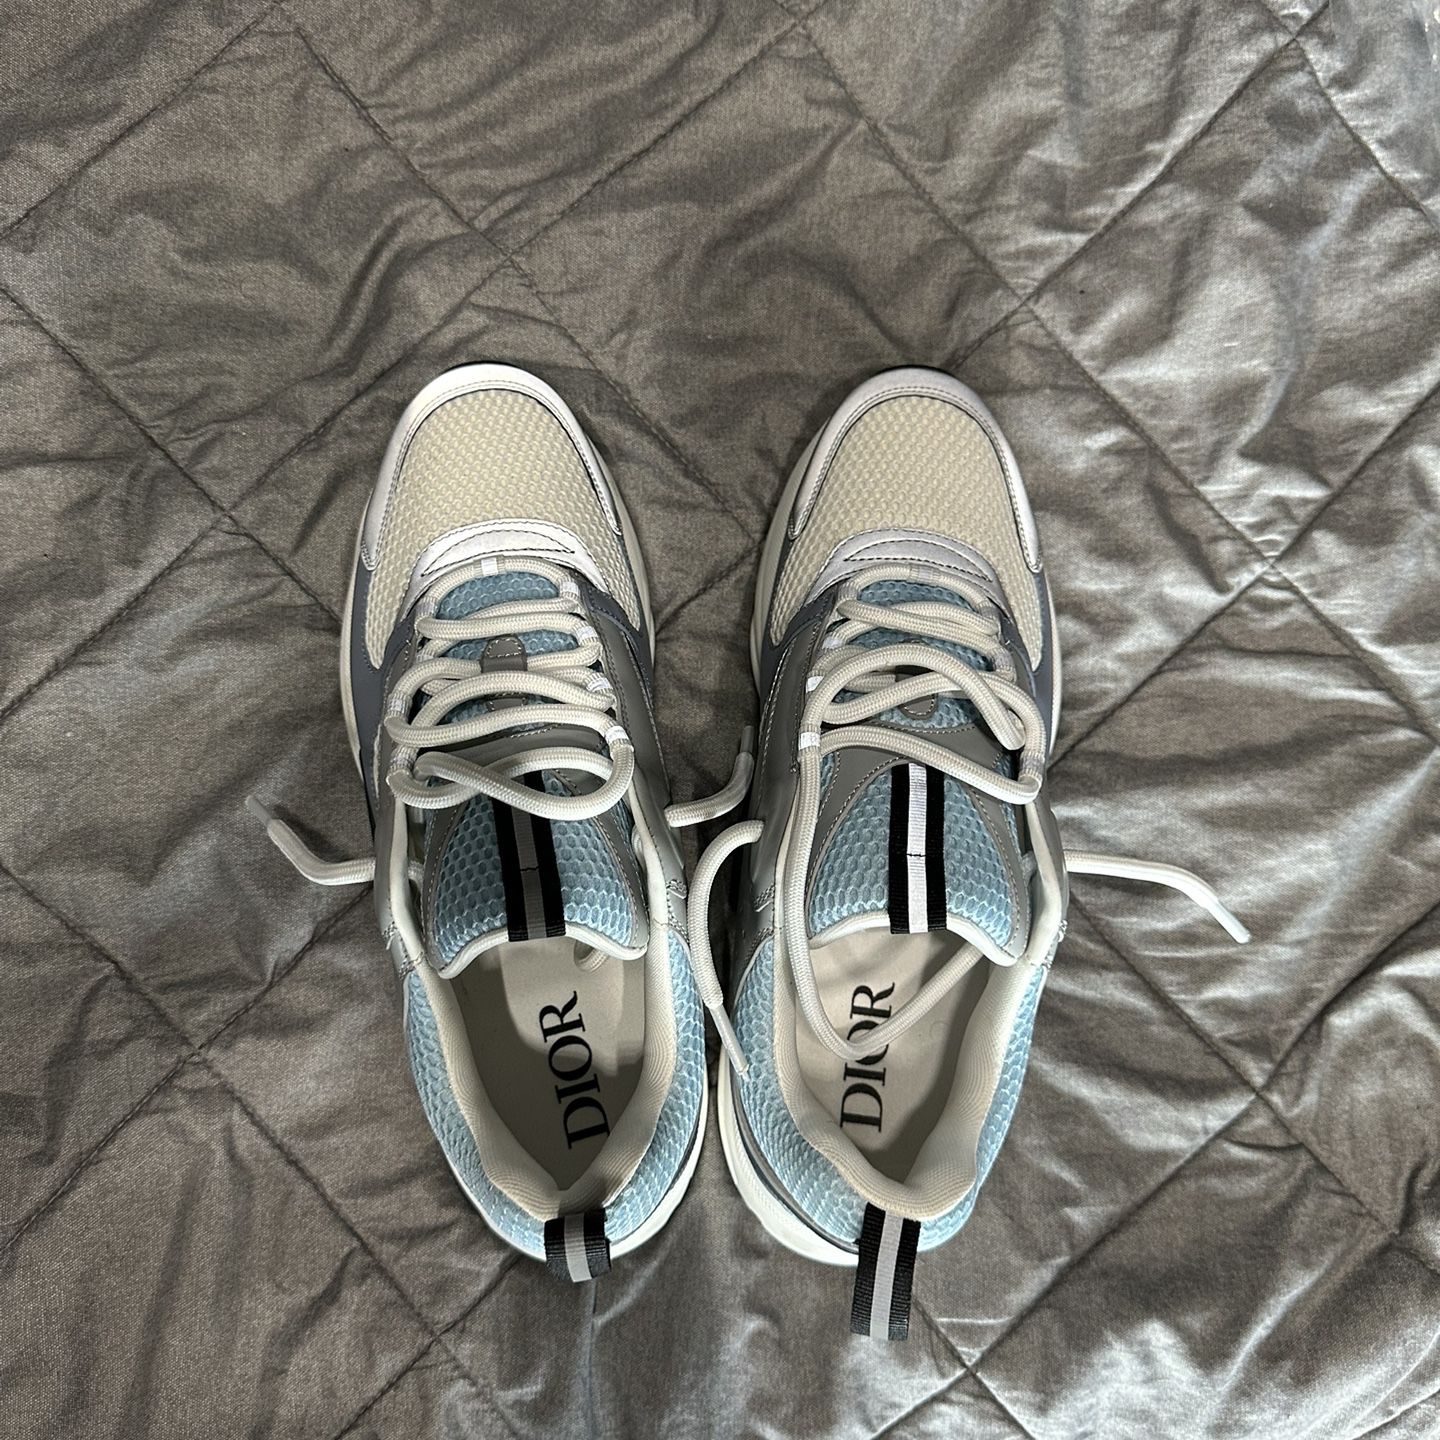 dior b22 iridescent reflective for Sale in Philadelphia, PA - OfferUp